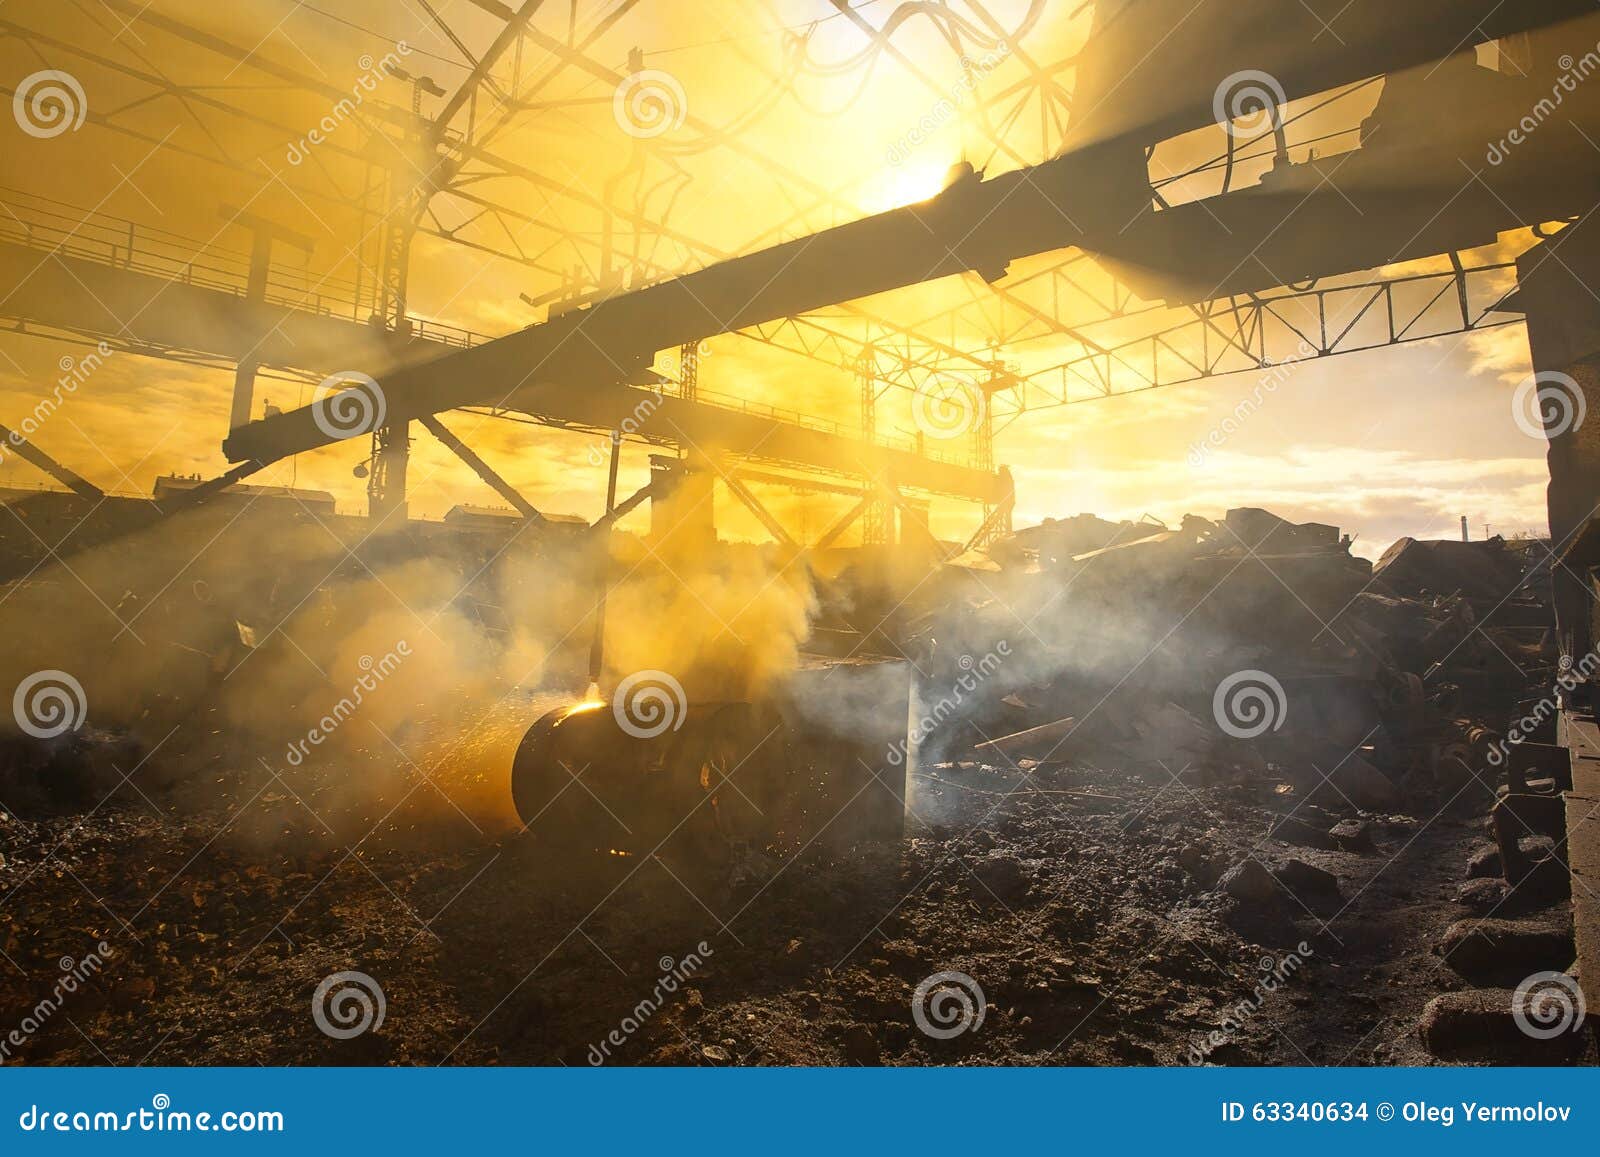 Scrap Metal And Smoke Stock Photo Image Of Industry 63340634